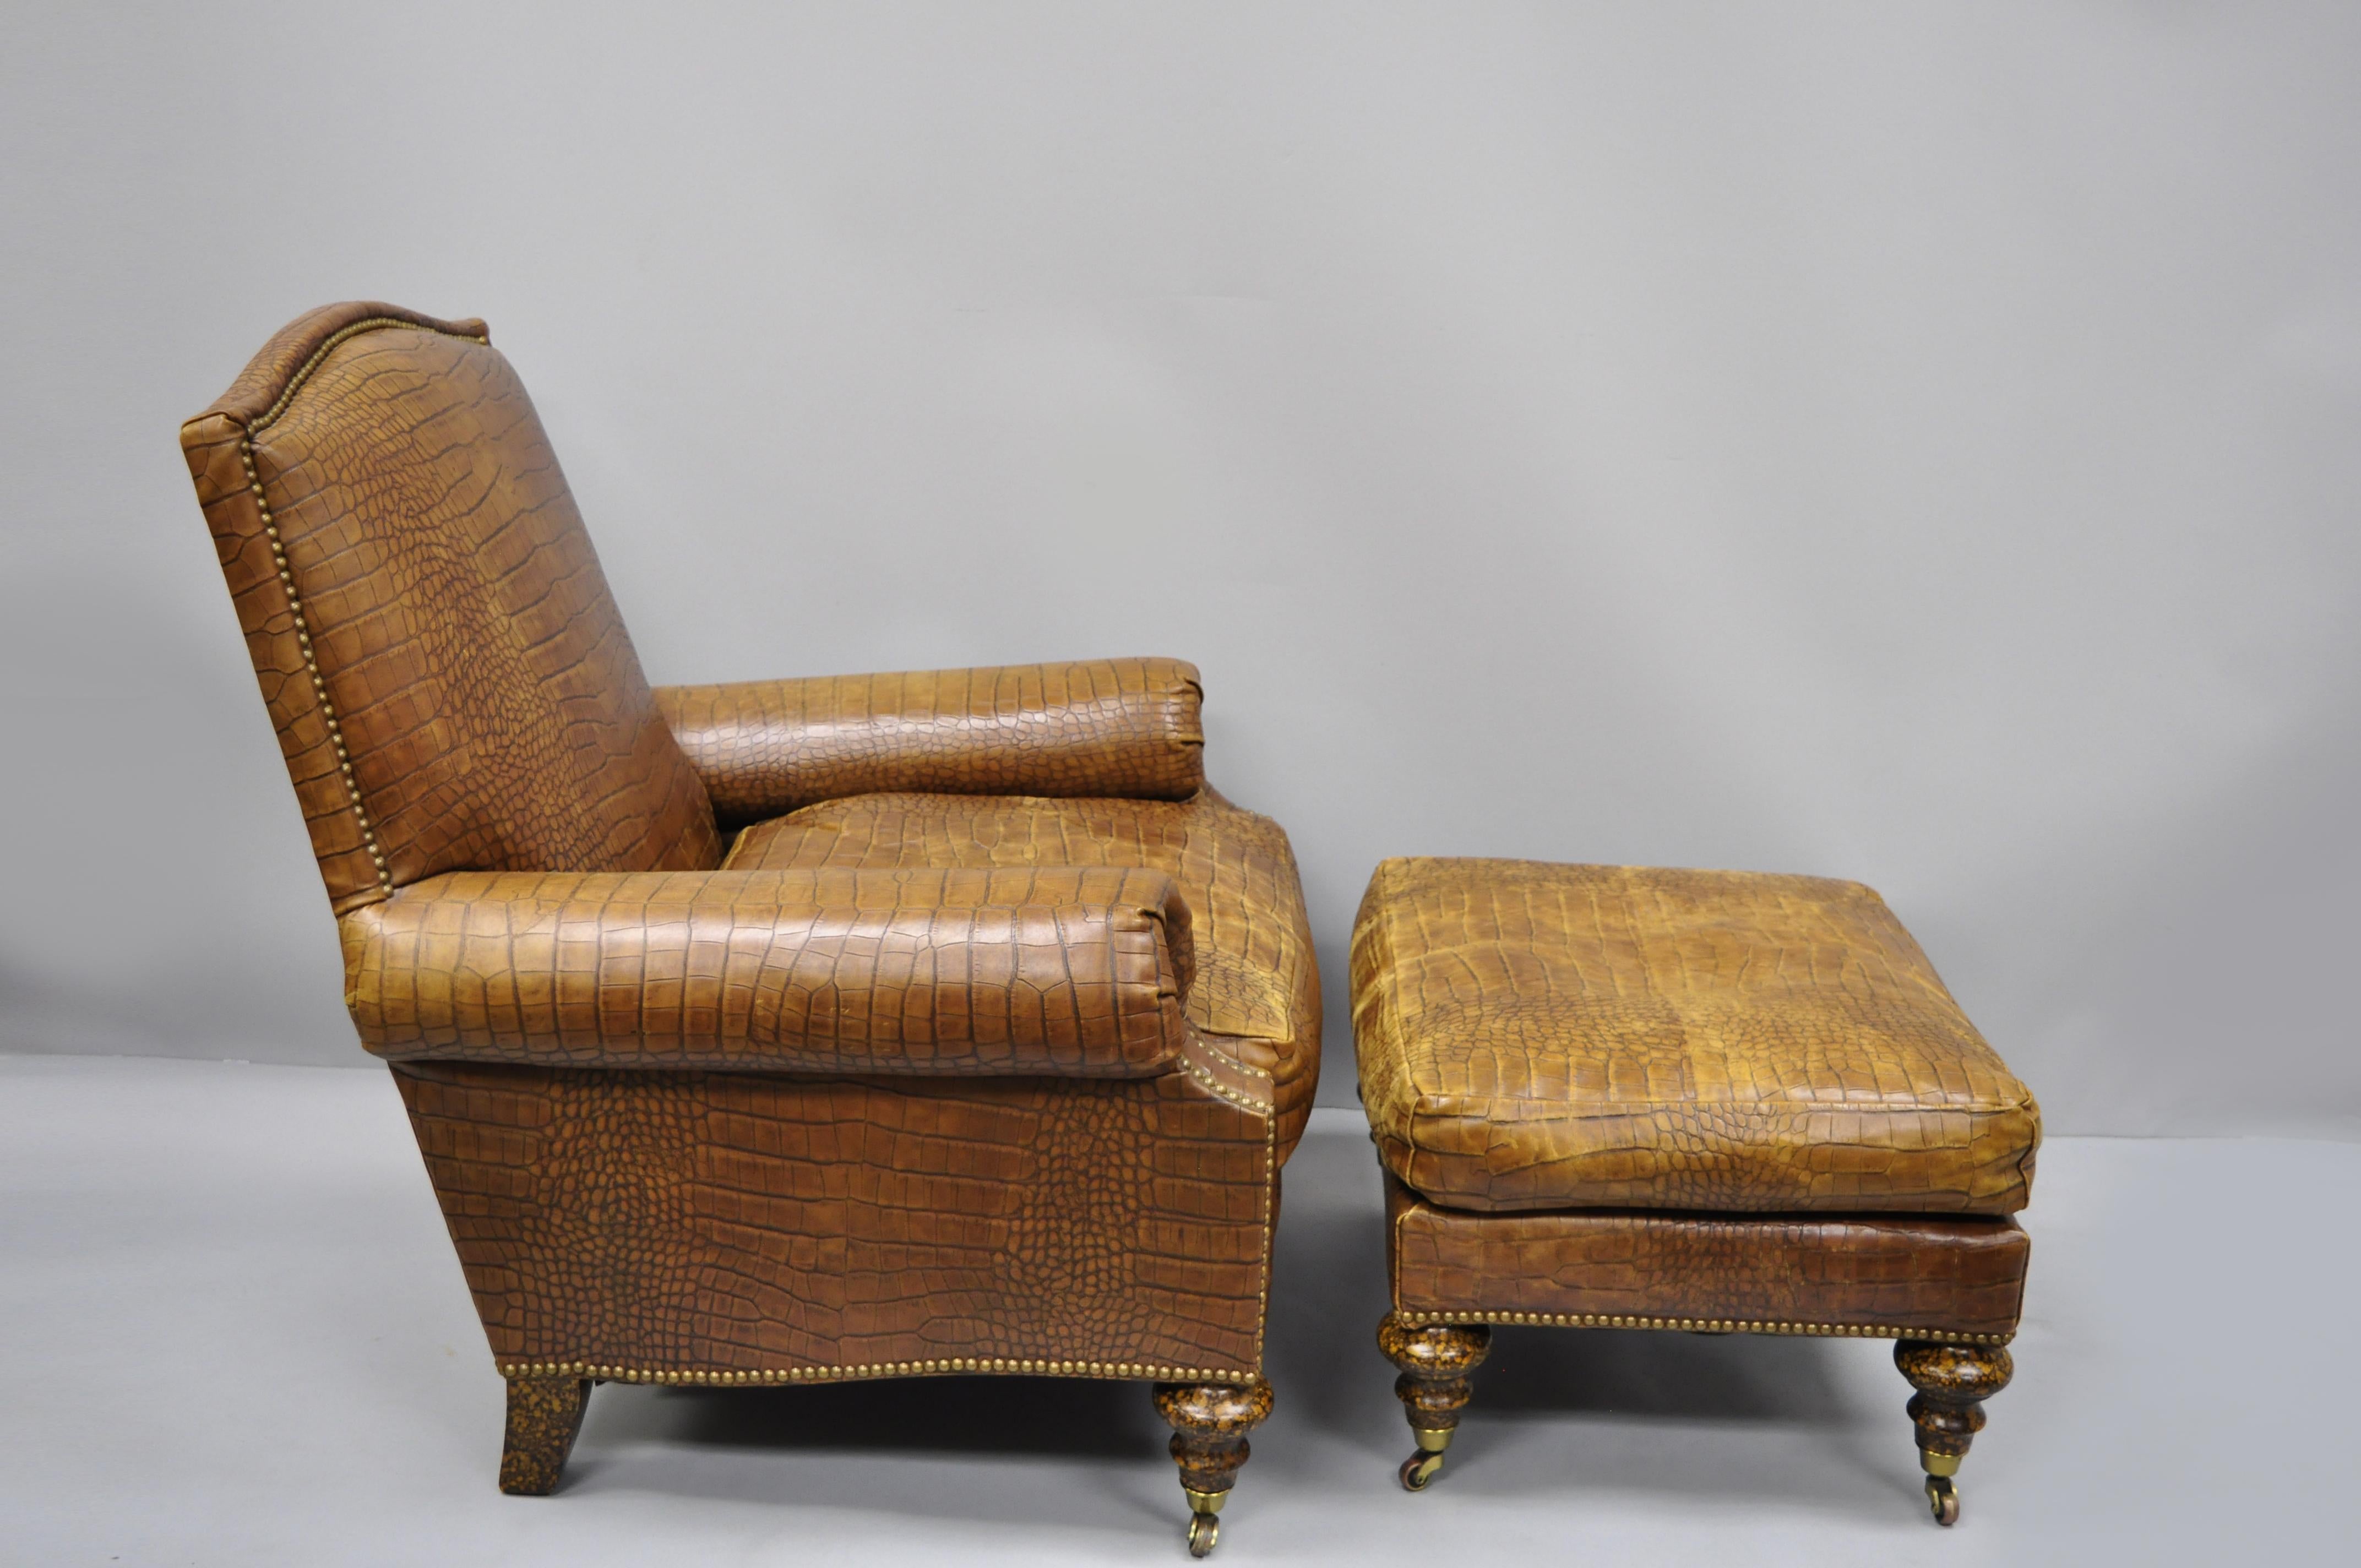 English Regency brown leather Gator Print Embossed lounge chair & ottoman by Pearson. Item features lounge chair and matching ottoman, faux gator print embossed brown leather upholstery, faux tortoiseshell finish to legs, brass rolling casters,